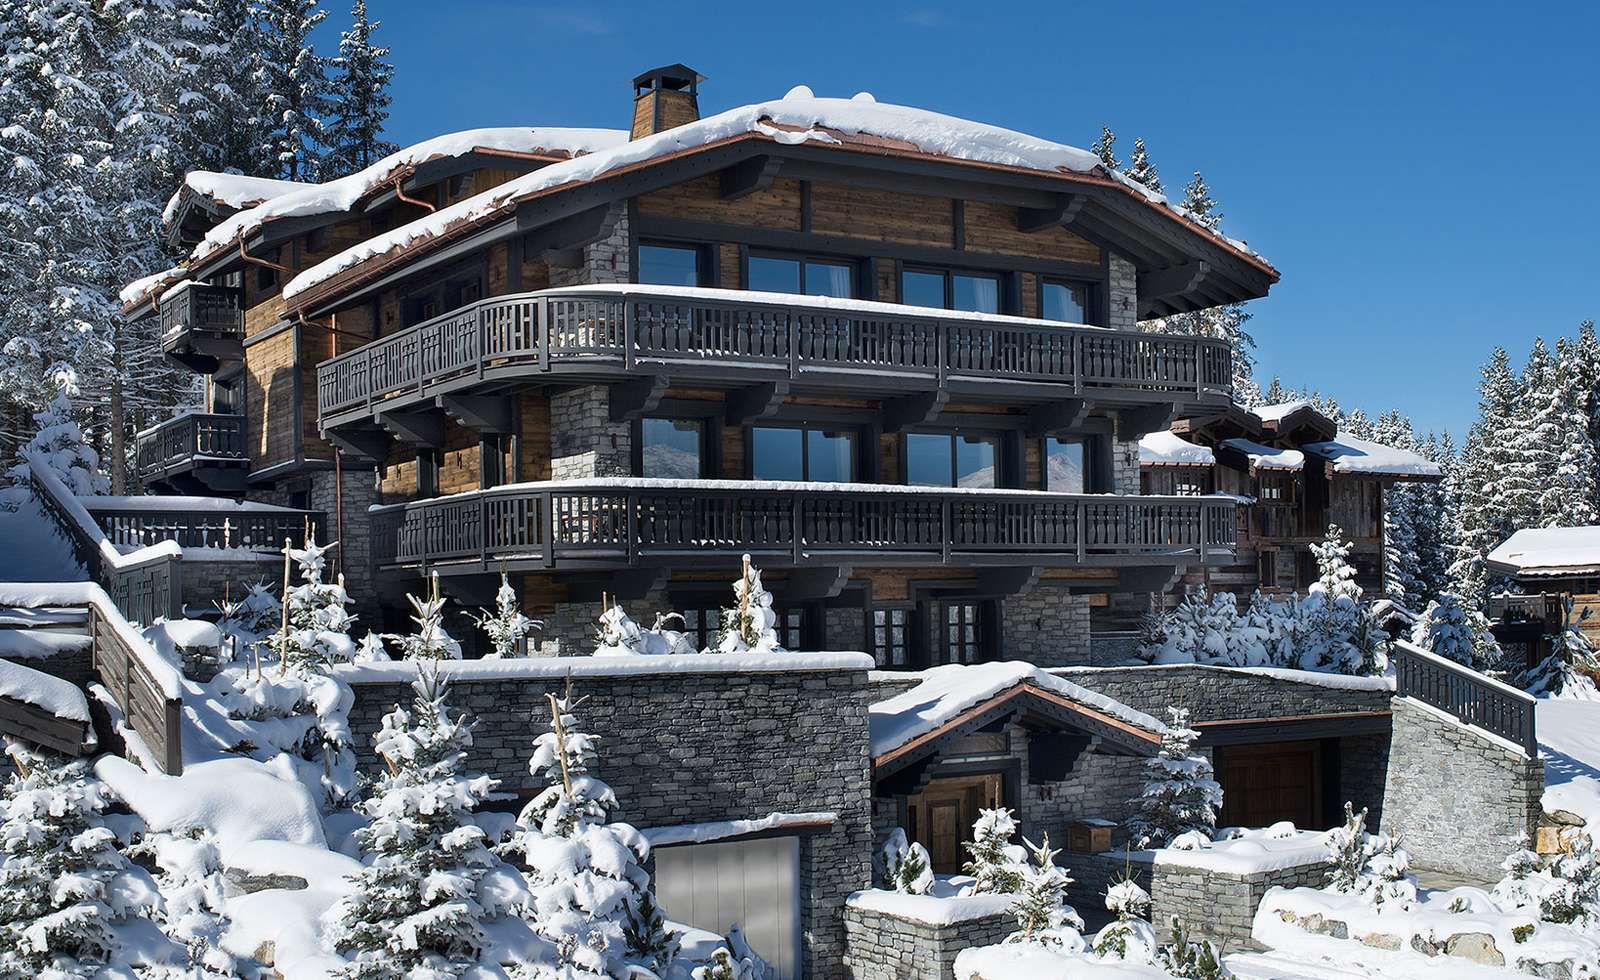 kings-avenue-luxury-chalet-courchevel-001-front-view-exterior-snow-with-blue-sky